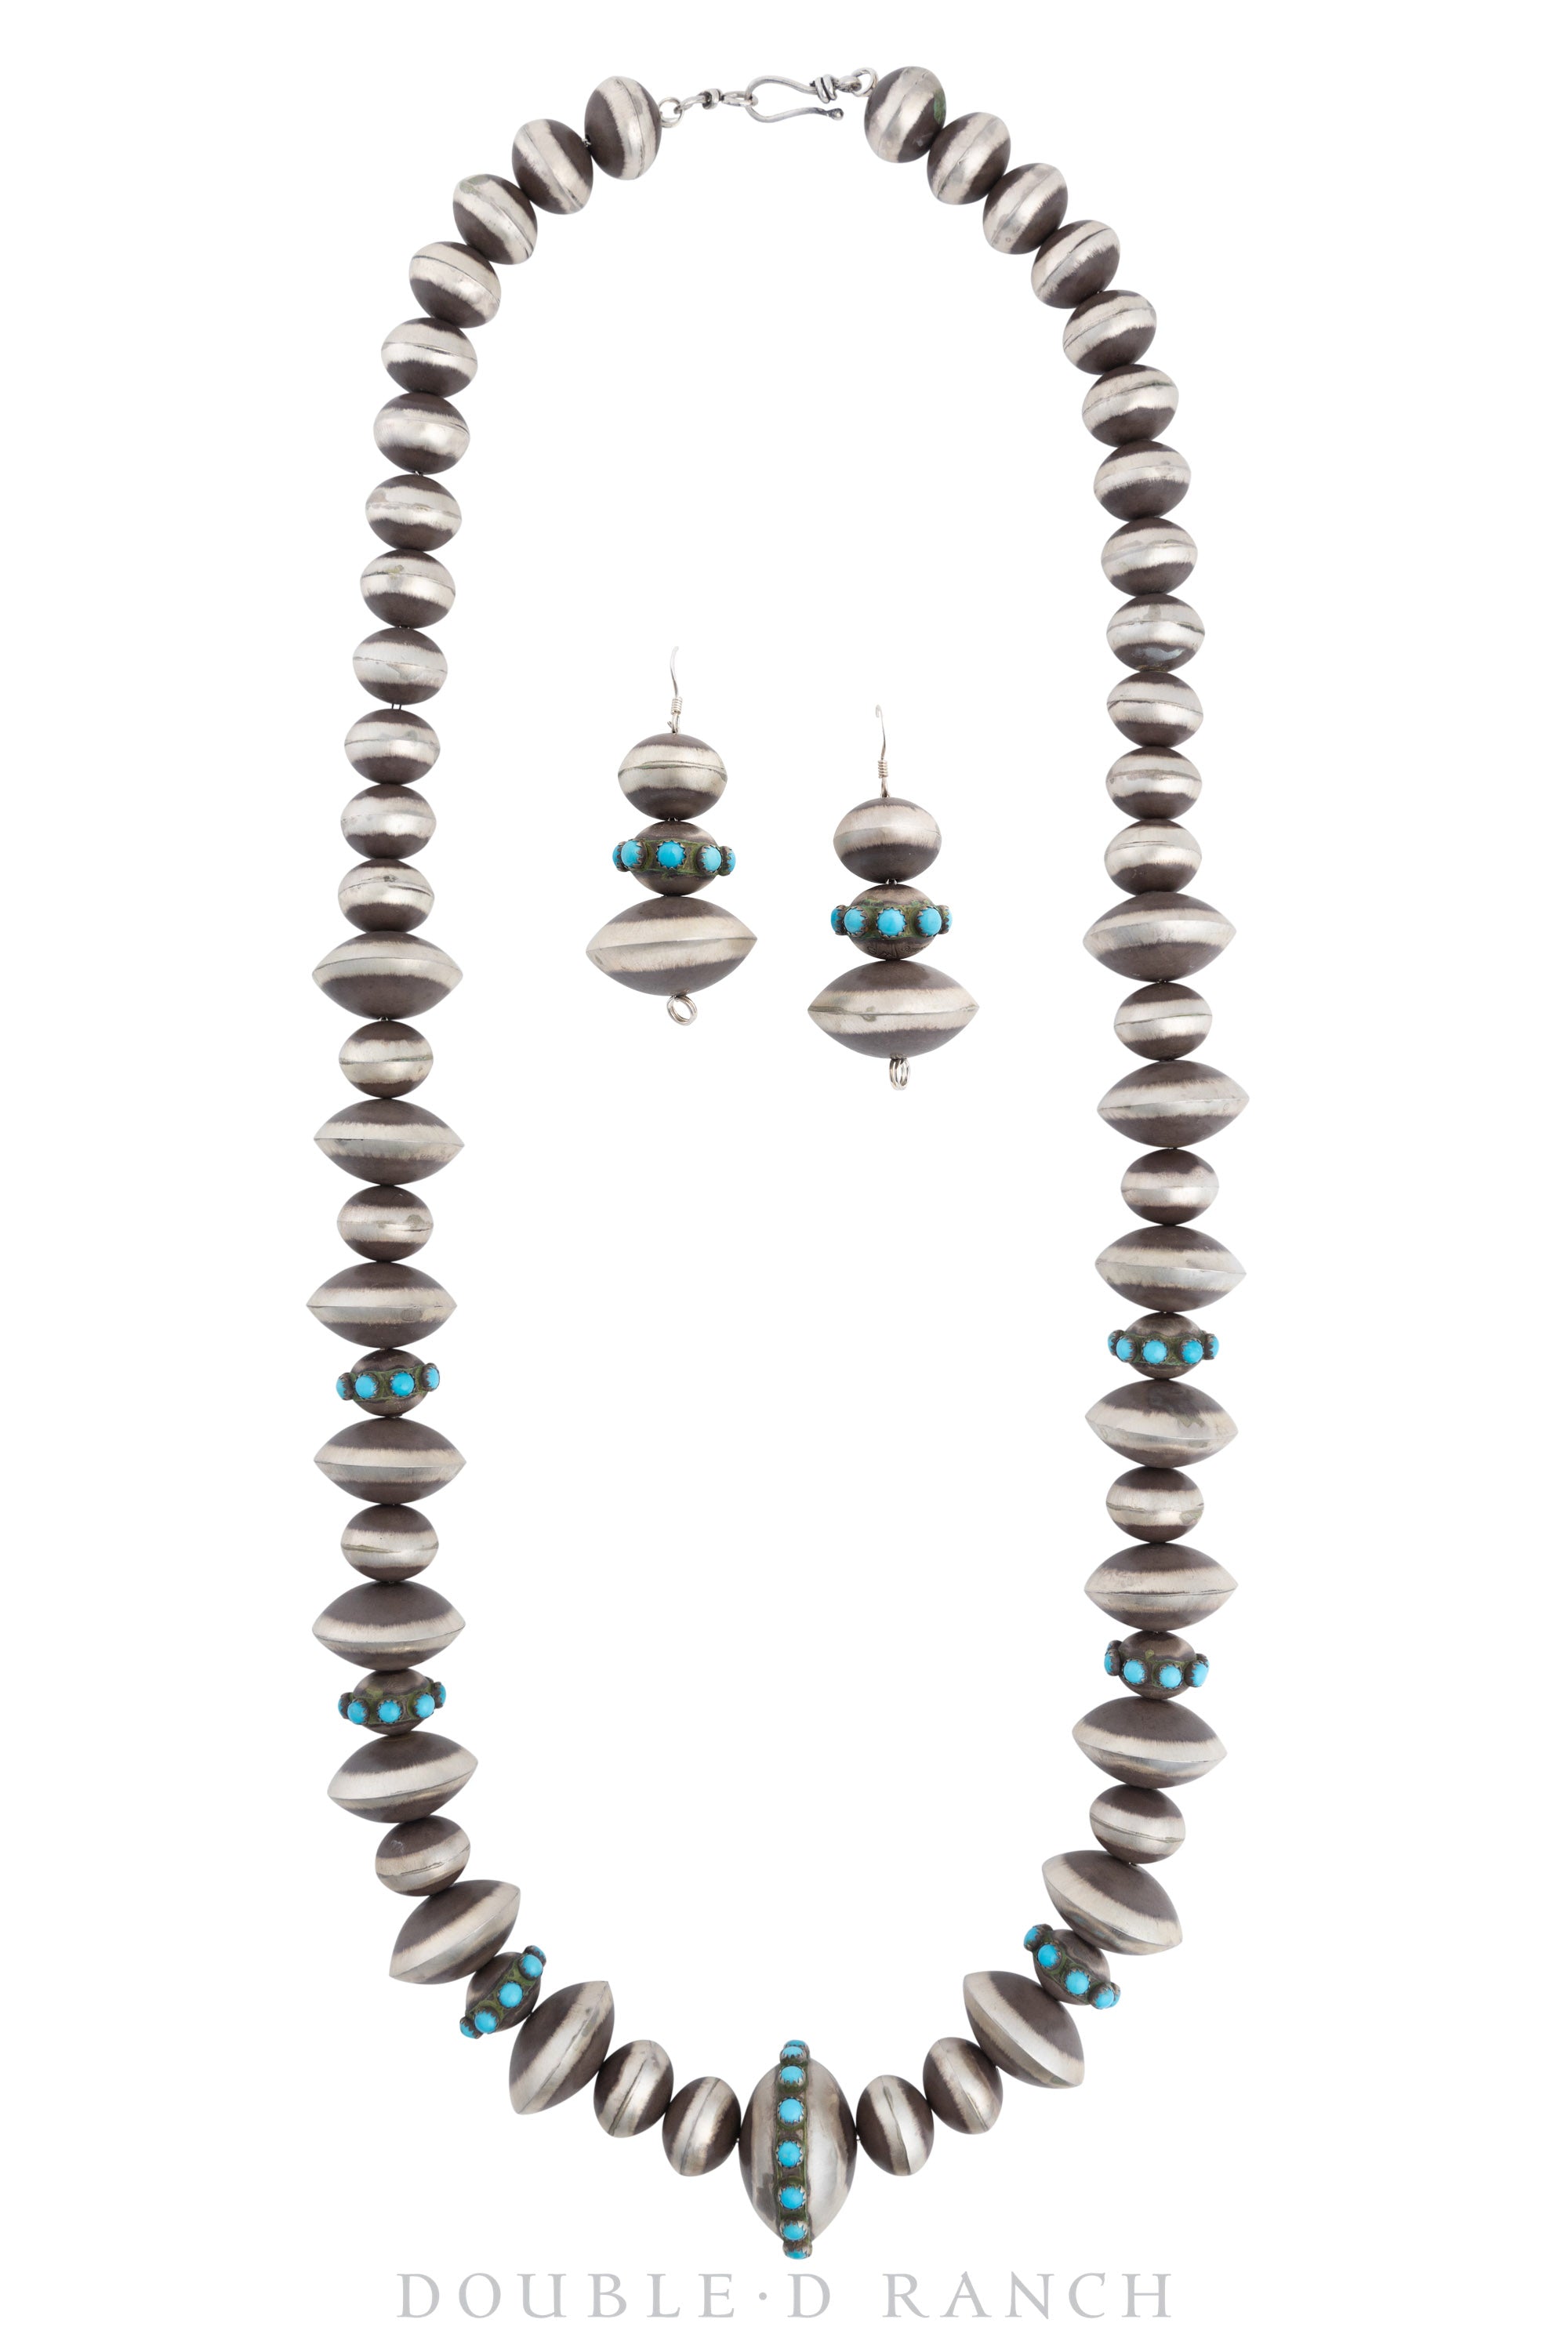 Necklace, Desert Pearls, Turquoise Inset, With Matching Earrings, Artisan, Contemporary, 3143